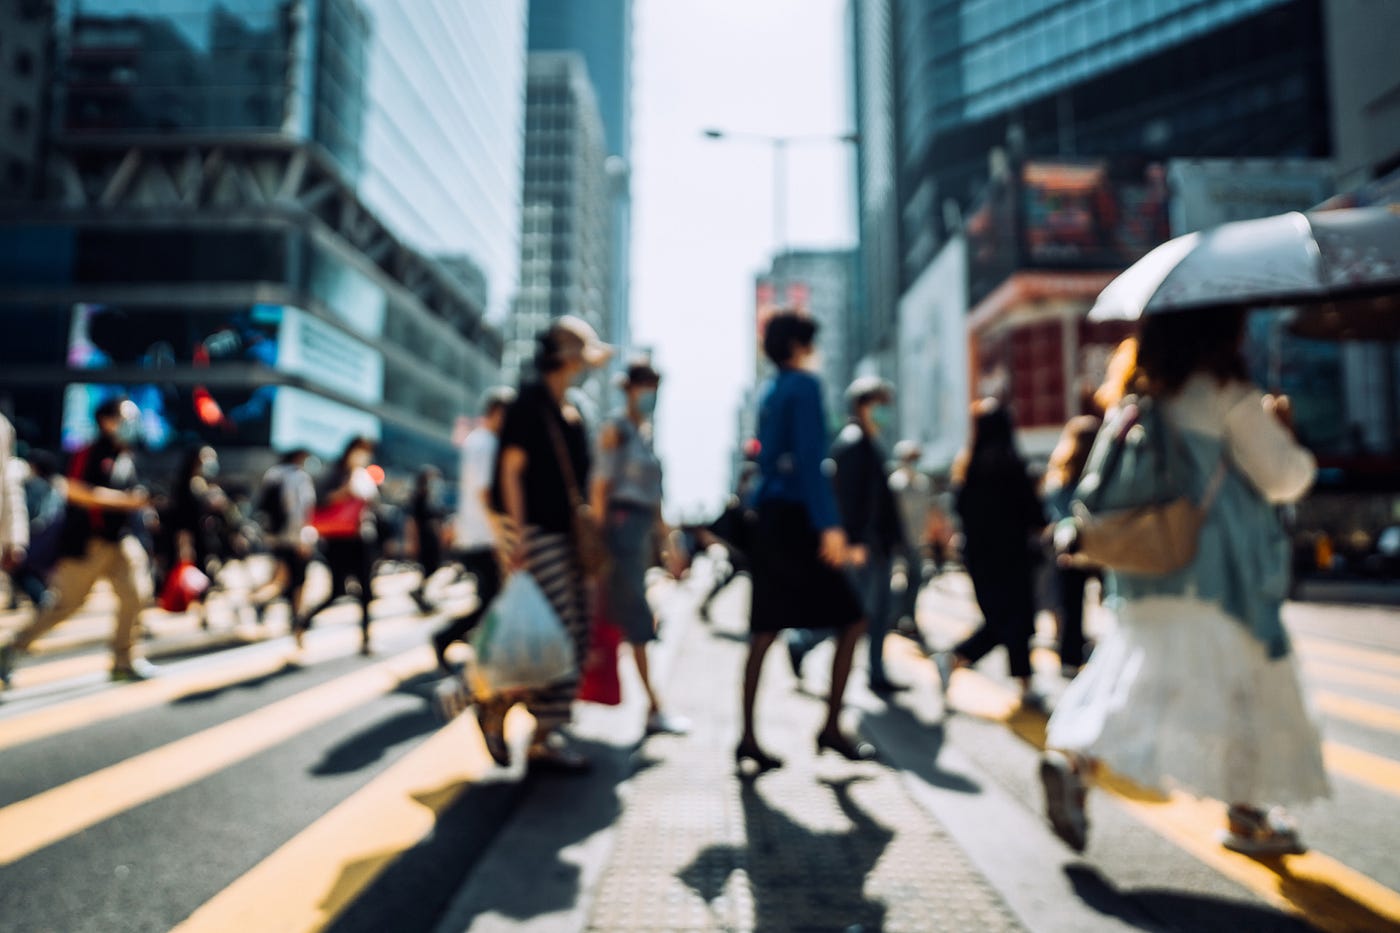 Blurred image of people walking at a crosswalk in a city.